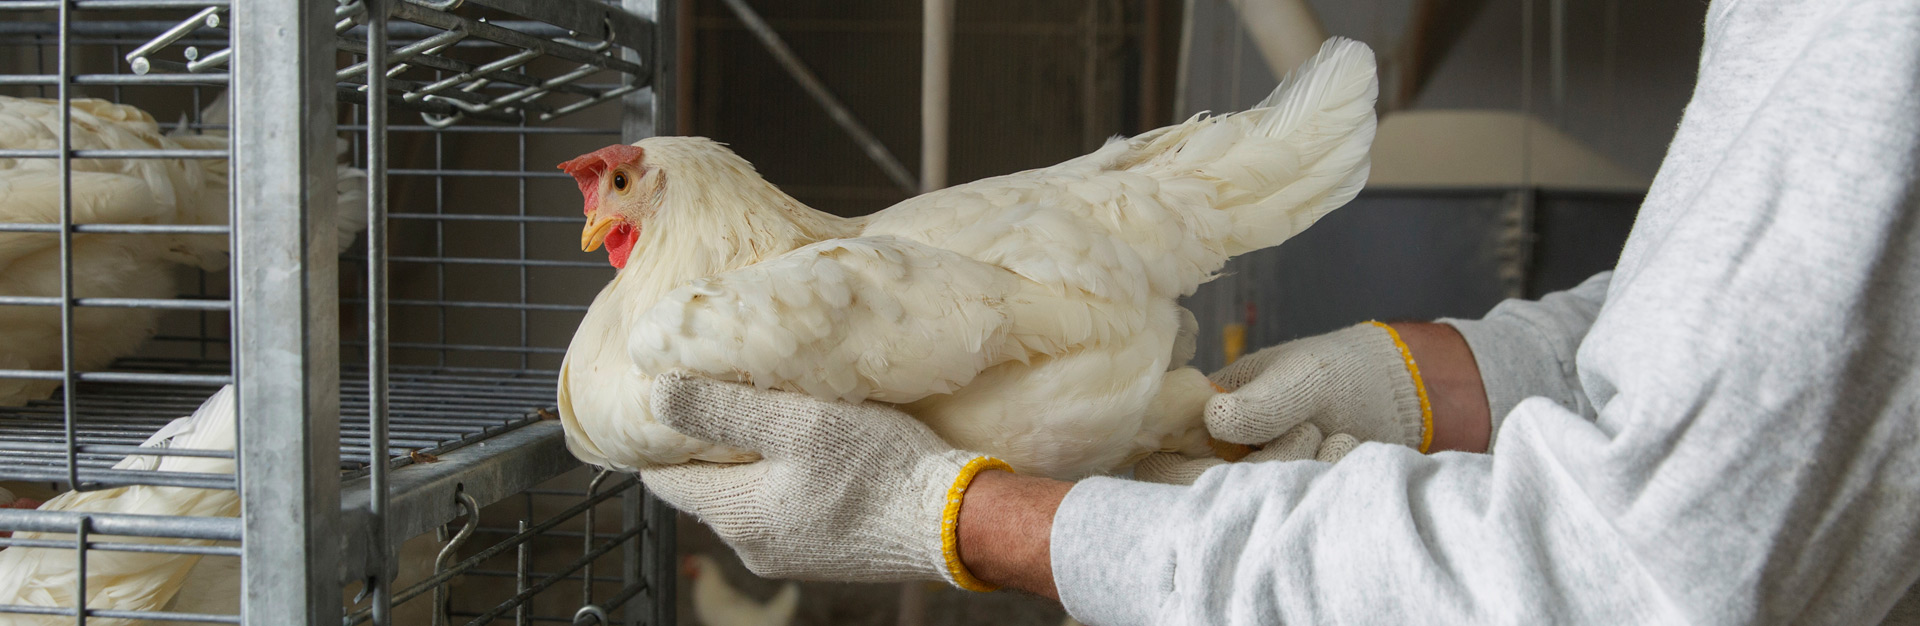 Poultry Technician inspecting feet of a chicken